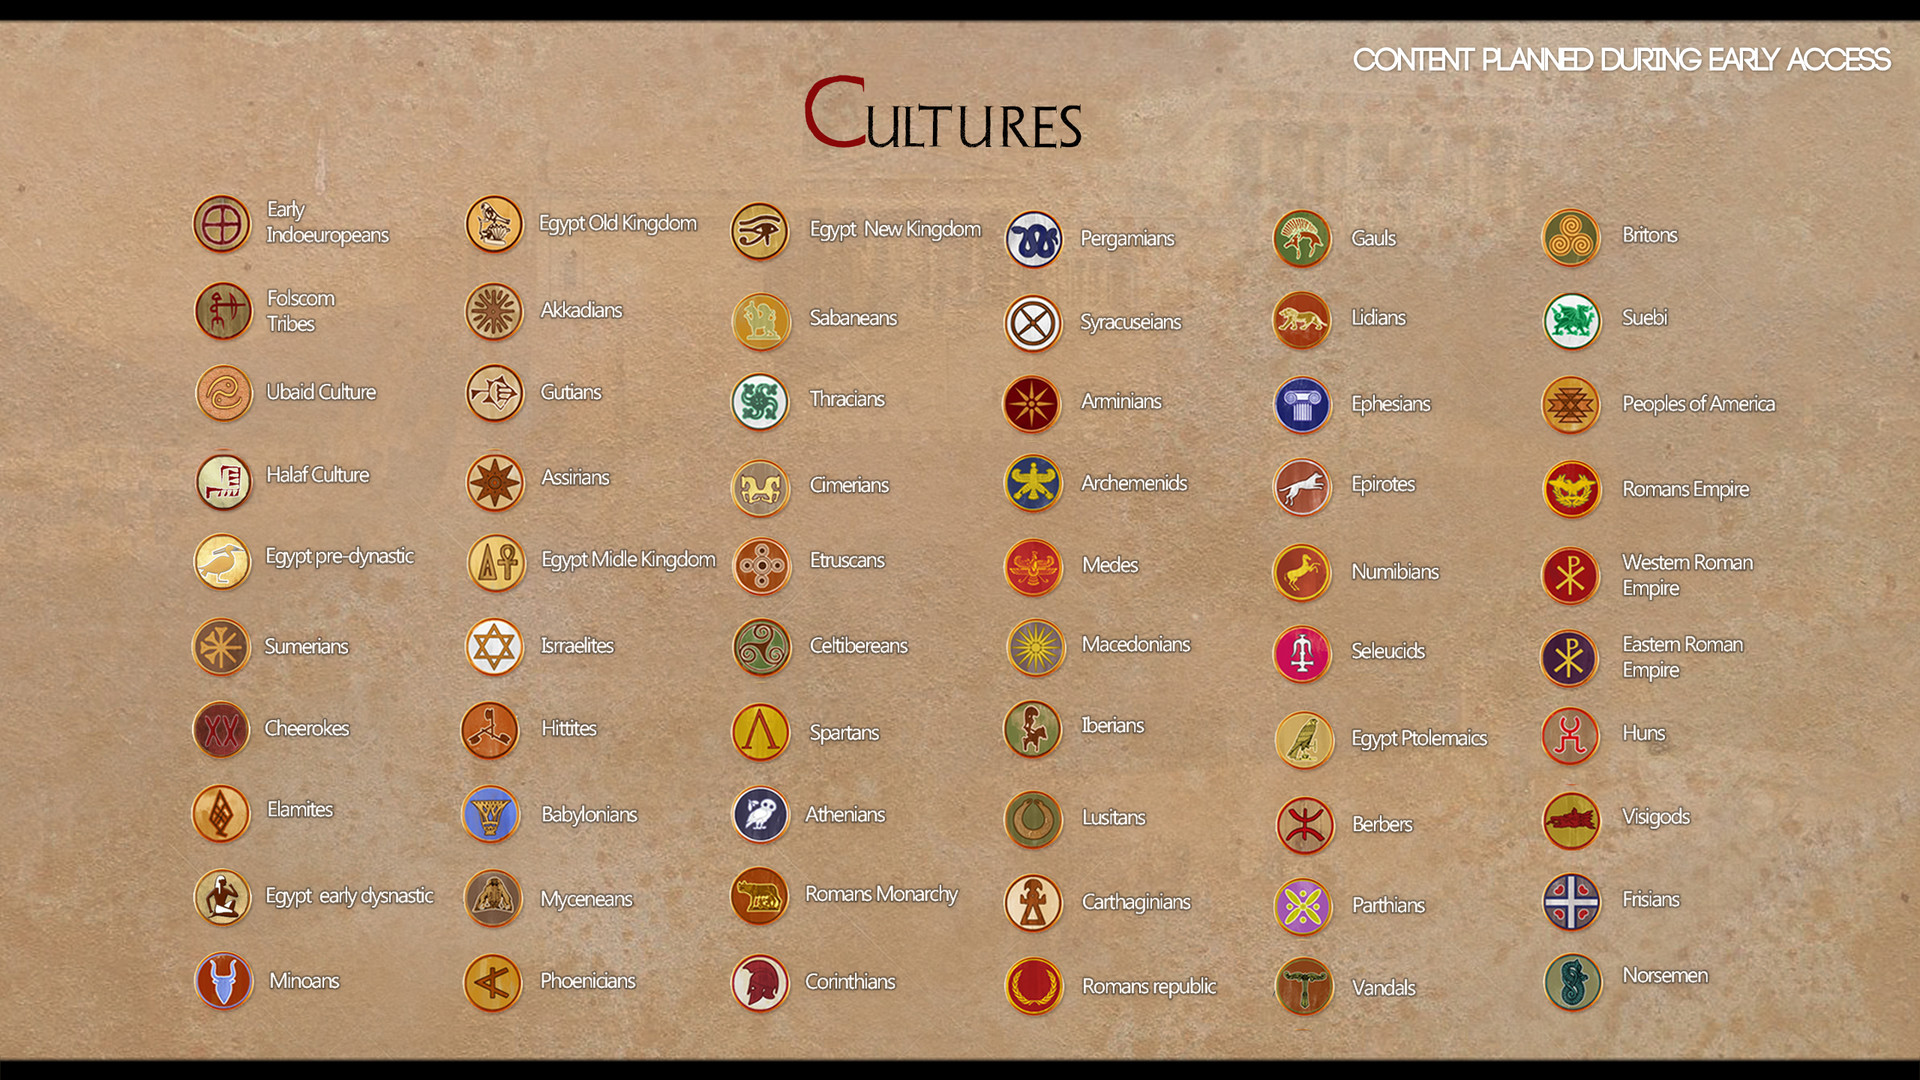 Birth of Cultures